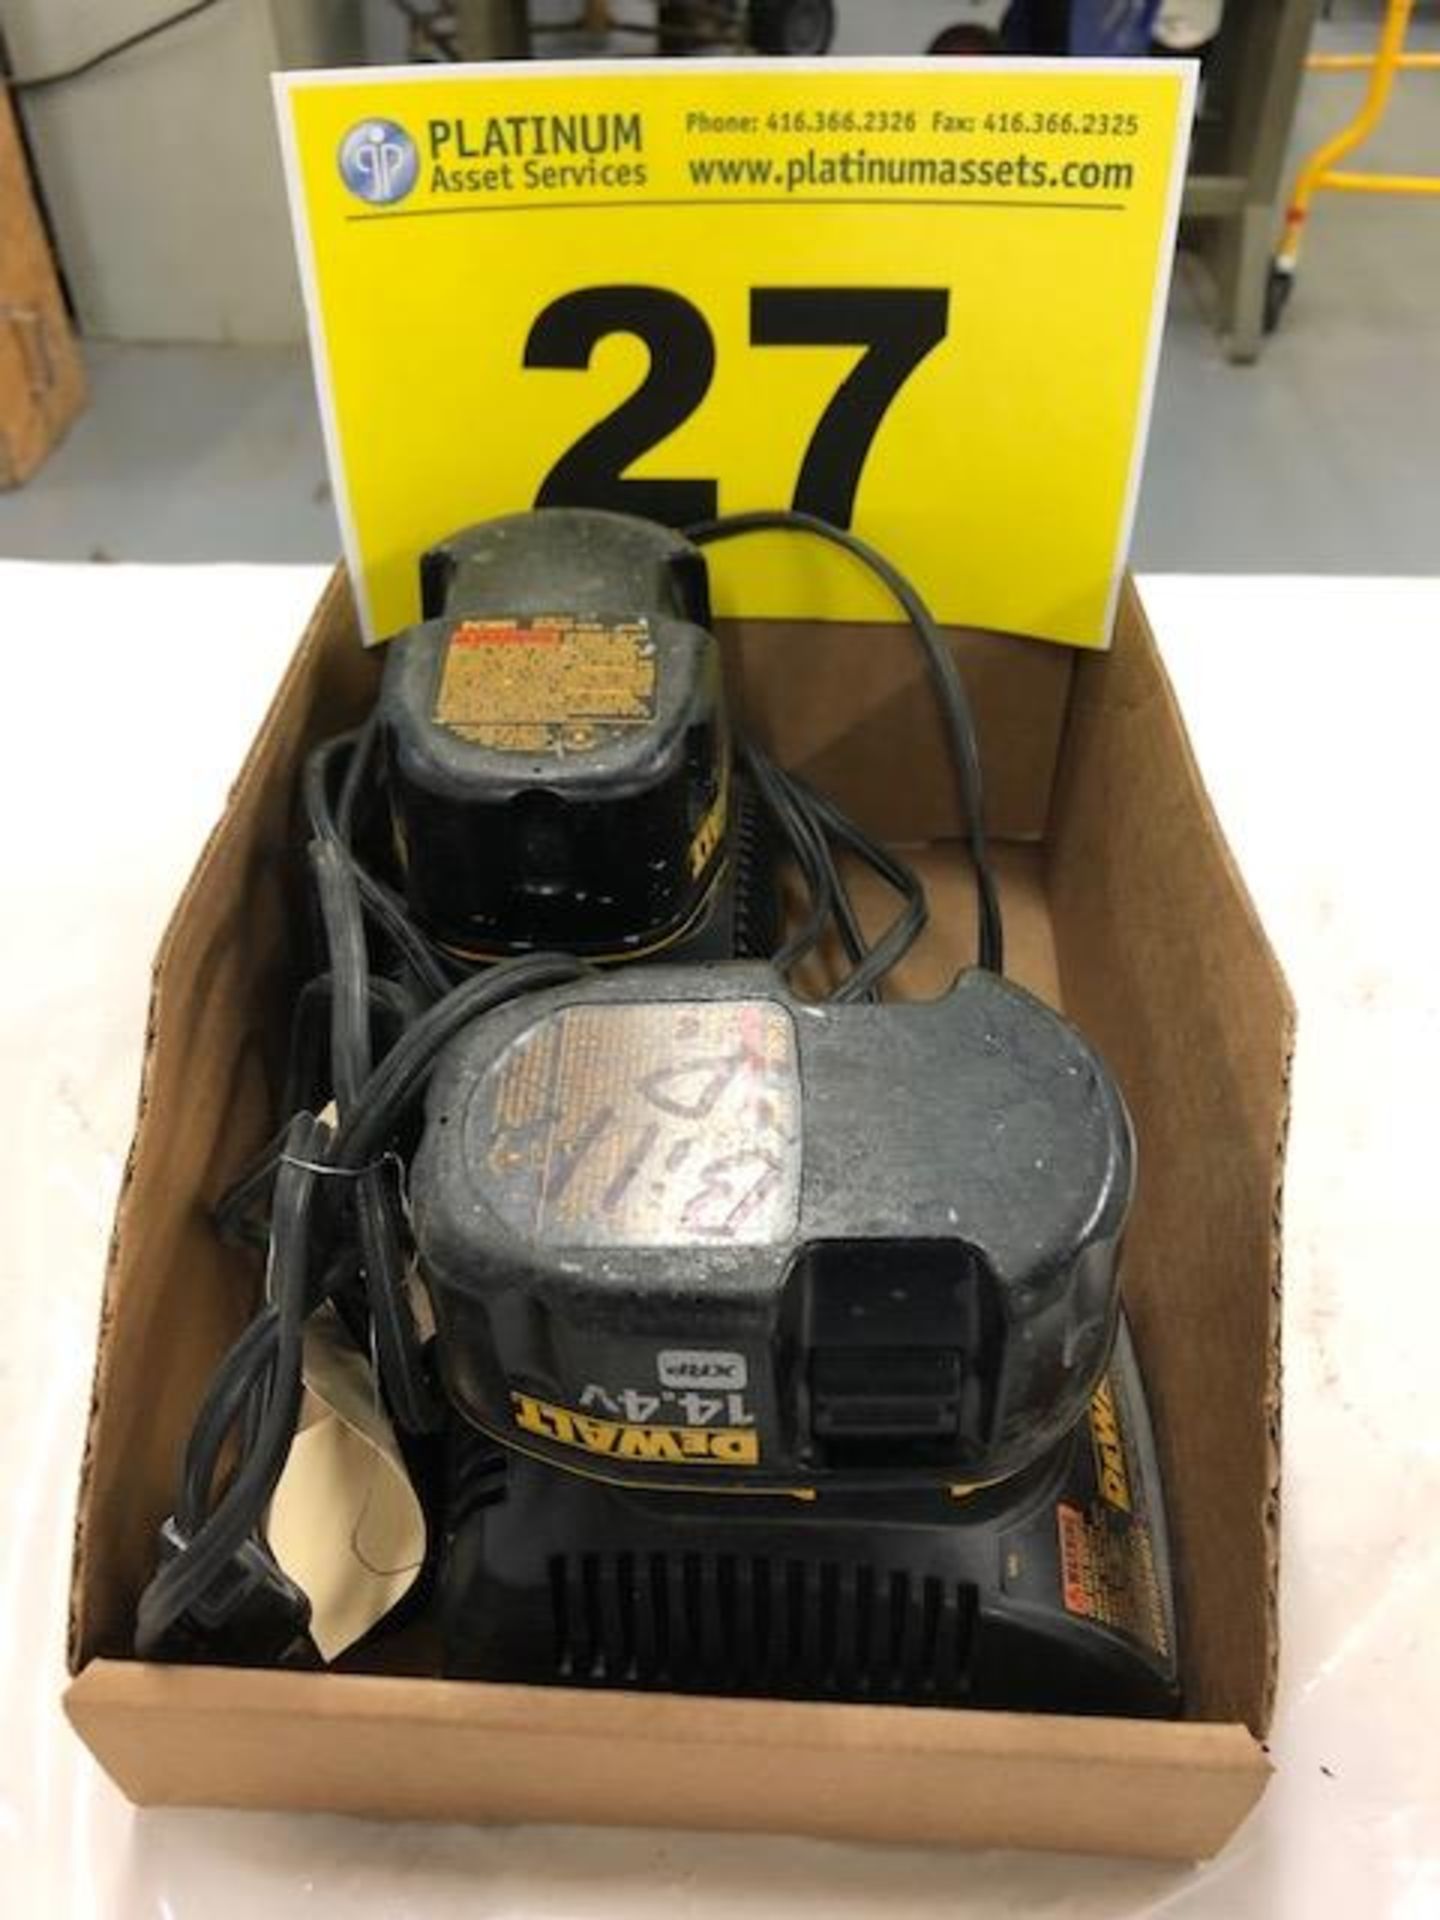 LOT OF DEWALT, 14.4 V, BATTERIES AND CHARGERS - Image 4 of 4